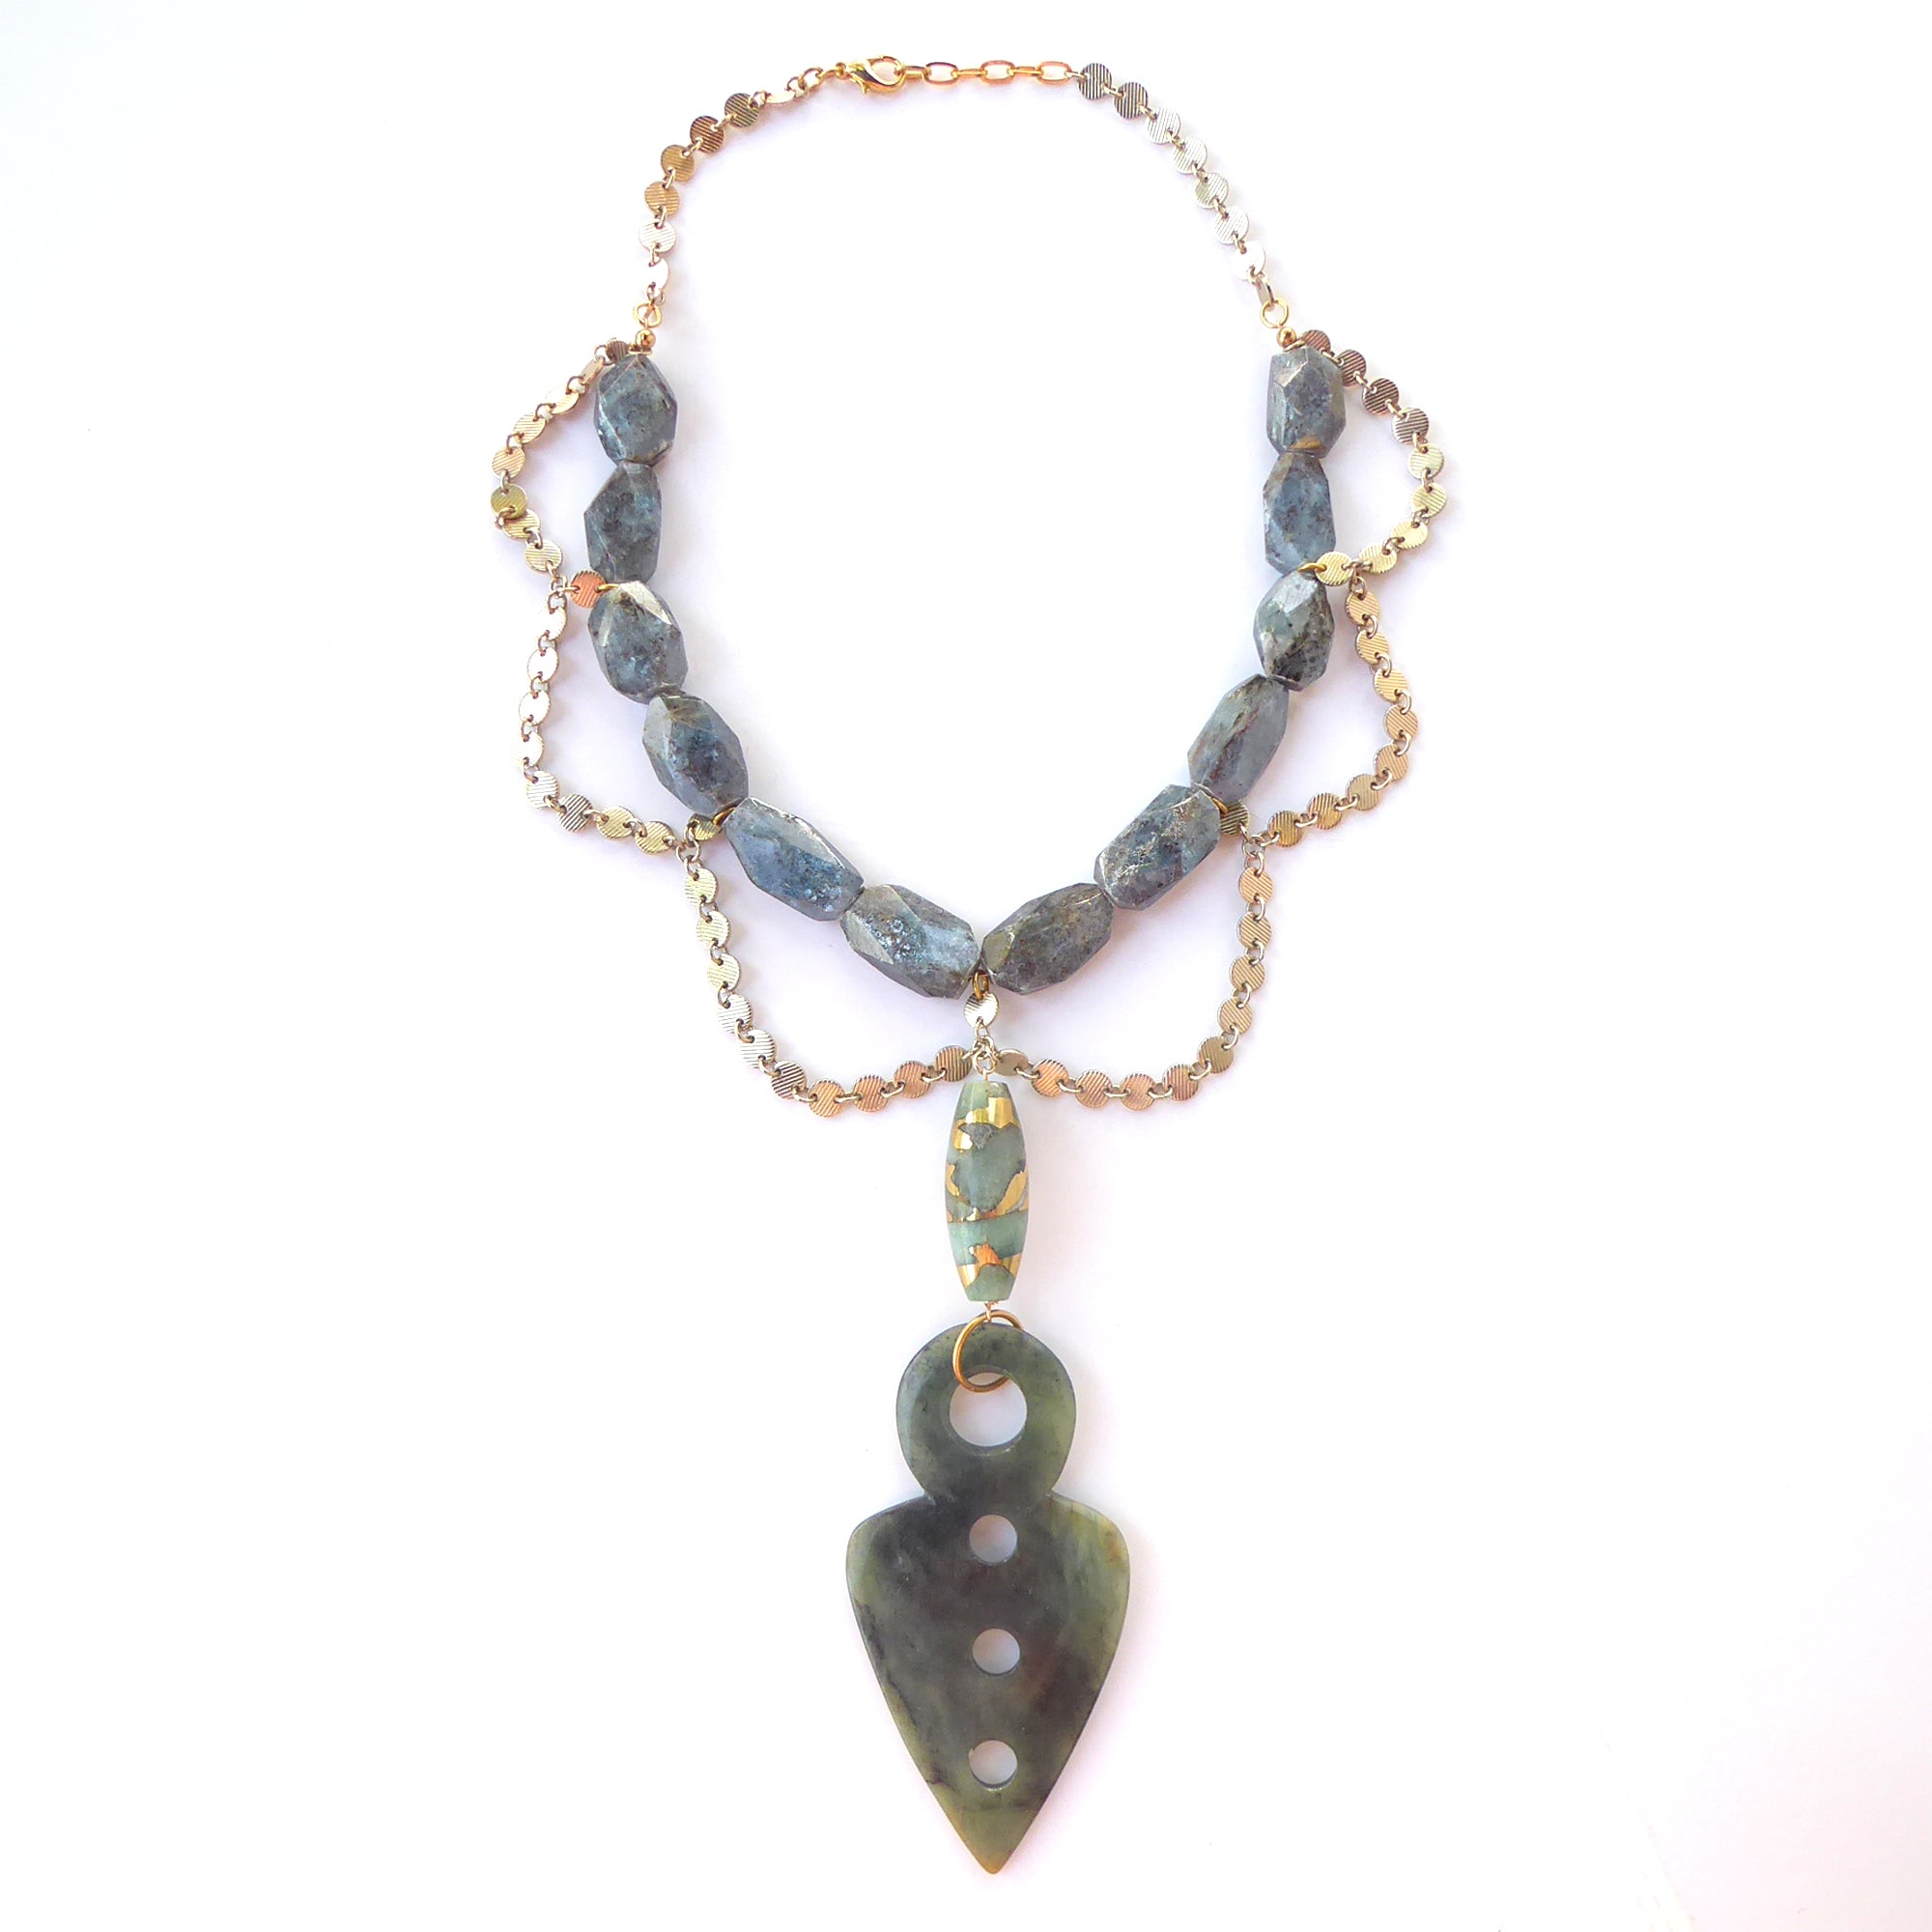 Serpentine spearhead necklace by Jenny Dayco 6